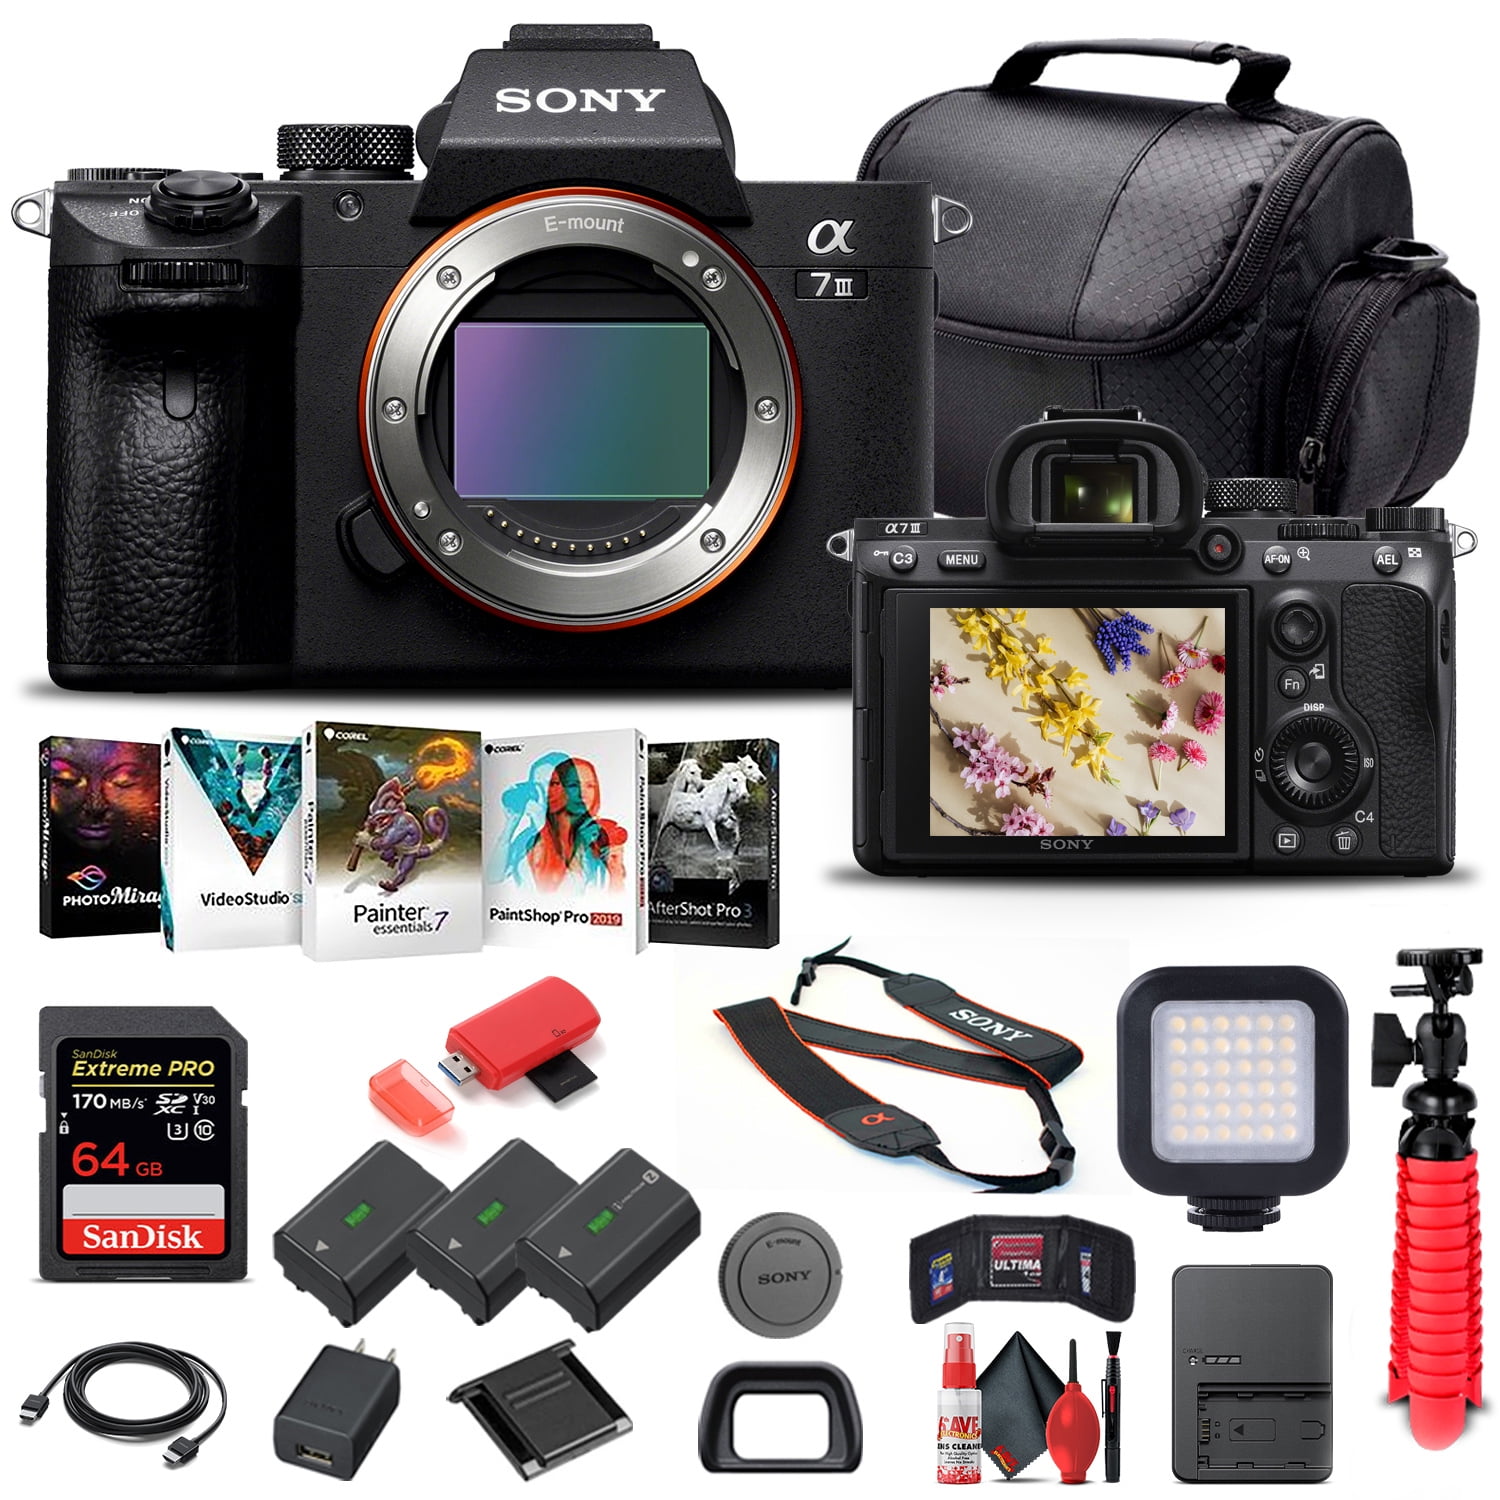 Sony a7 II (Alpha ILCE-7M2) Compact System Camera With HD 1080p, 24.3MP,  Wi-Fi